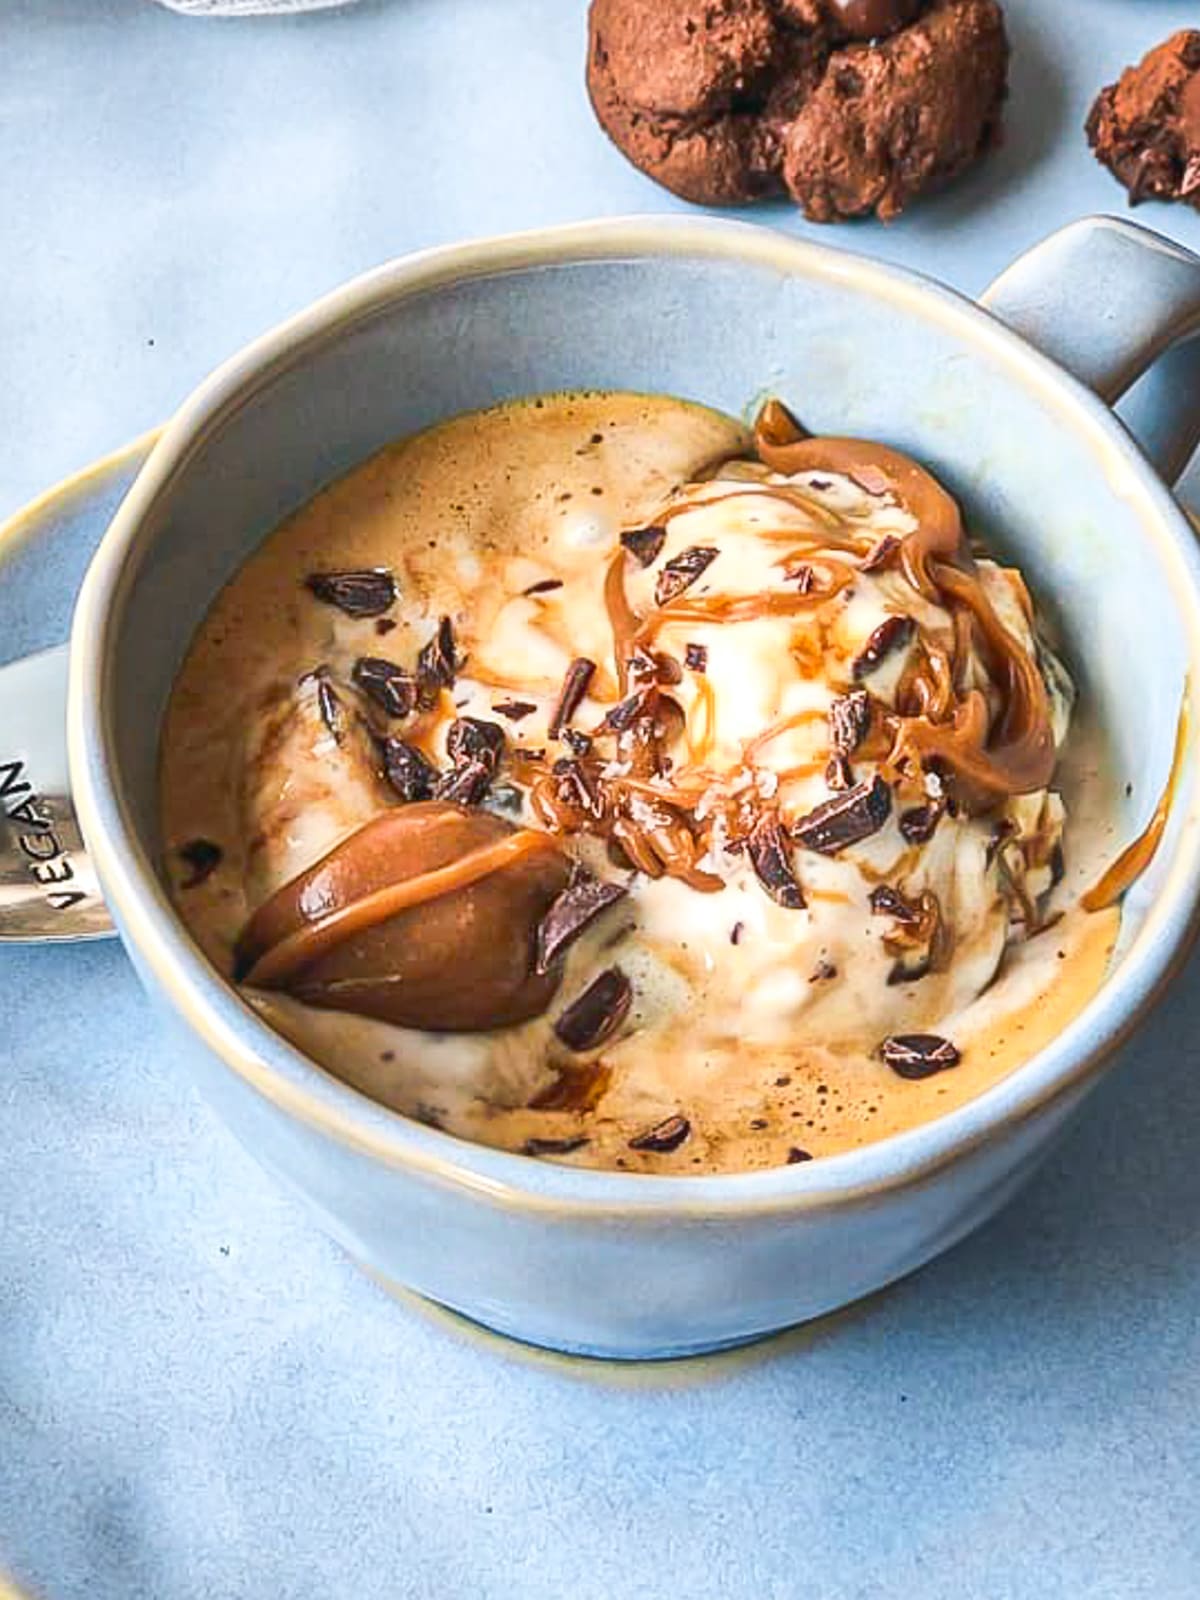 Mug of Italian Affogato topped with caramel and chocolate curls.